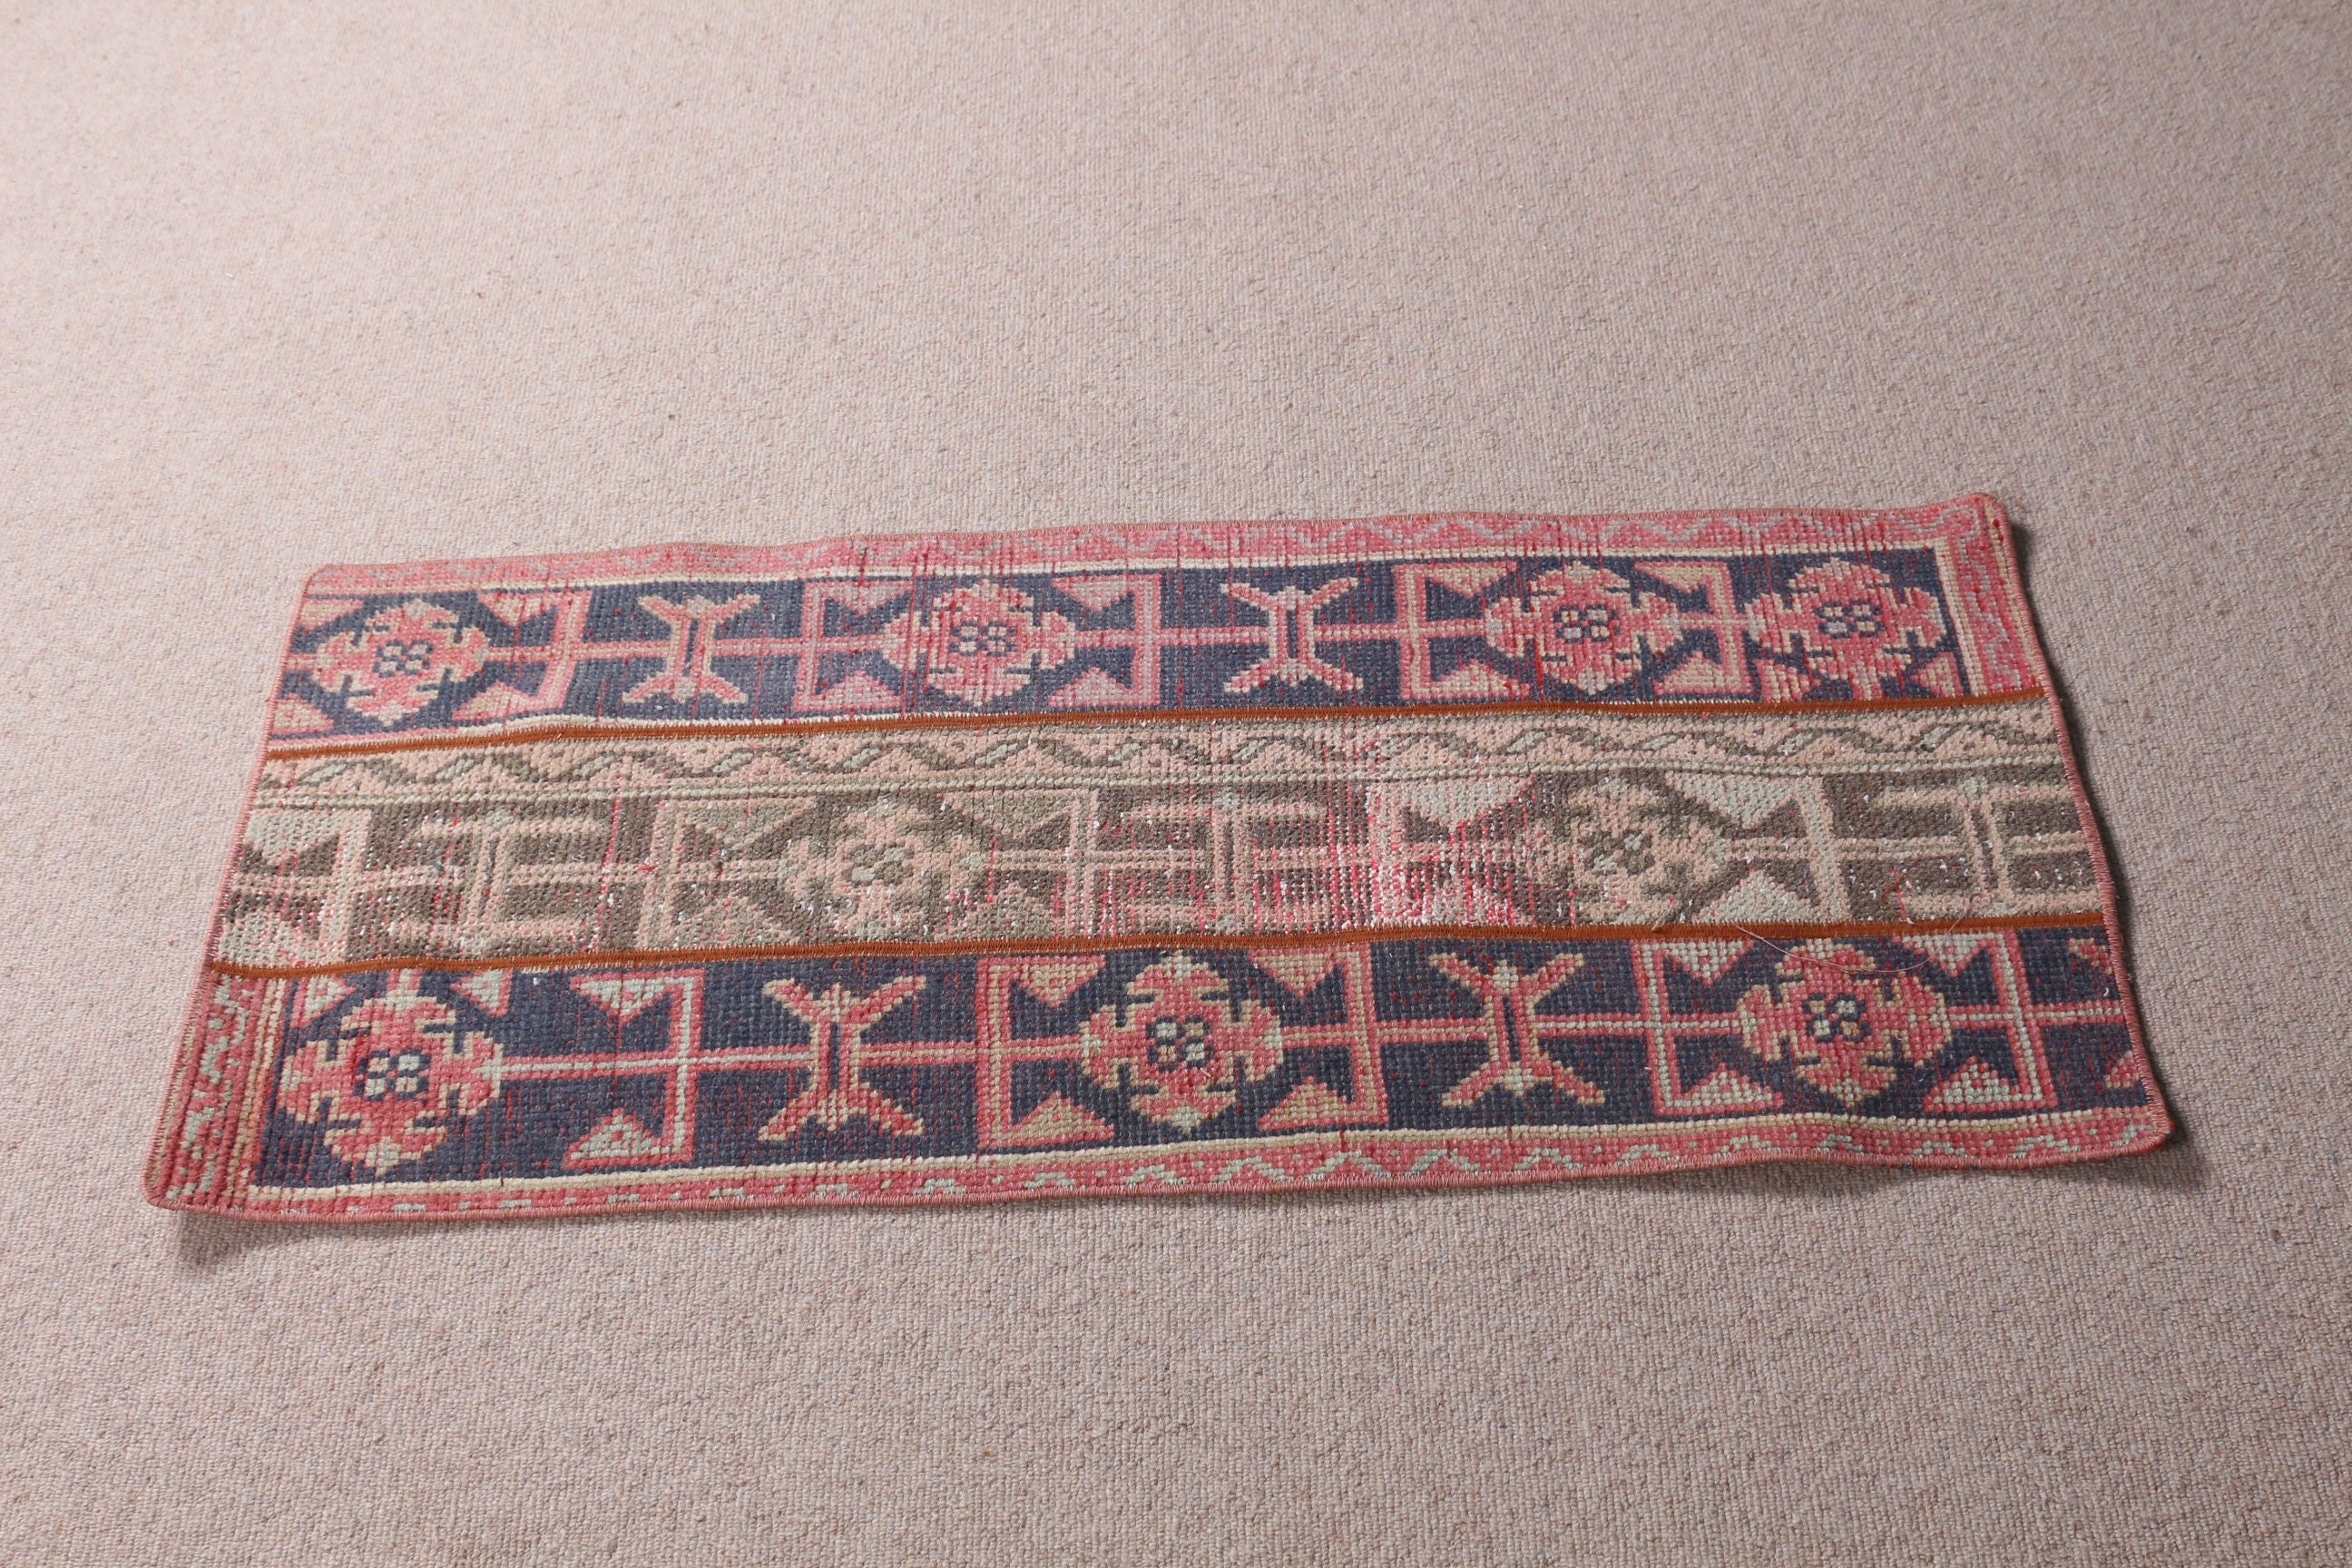 Vintage Rug, Turkish Rug, Bathroom Rug, Red  1.7x3.7 ft Small Rug, Cool Rugs, Rugs for Kitchen, Antique Rug, Entry Rugs